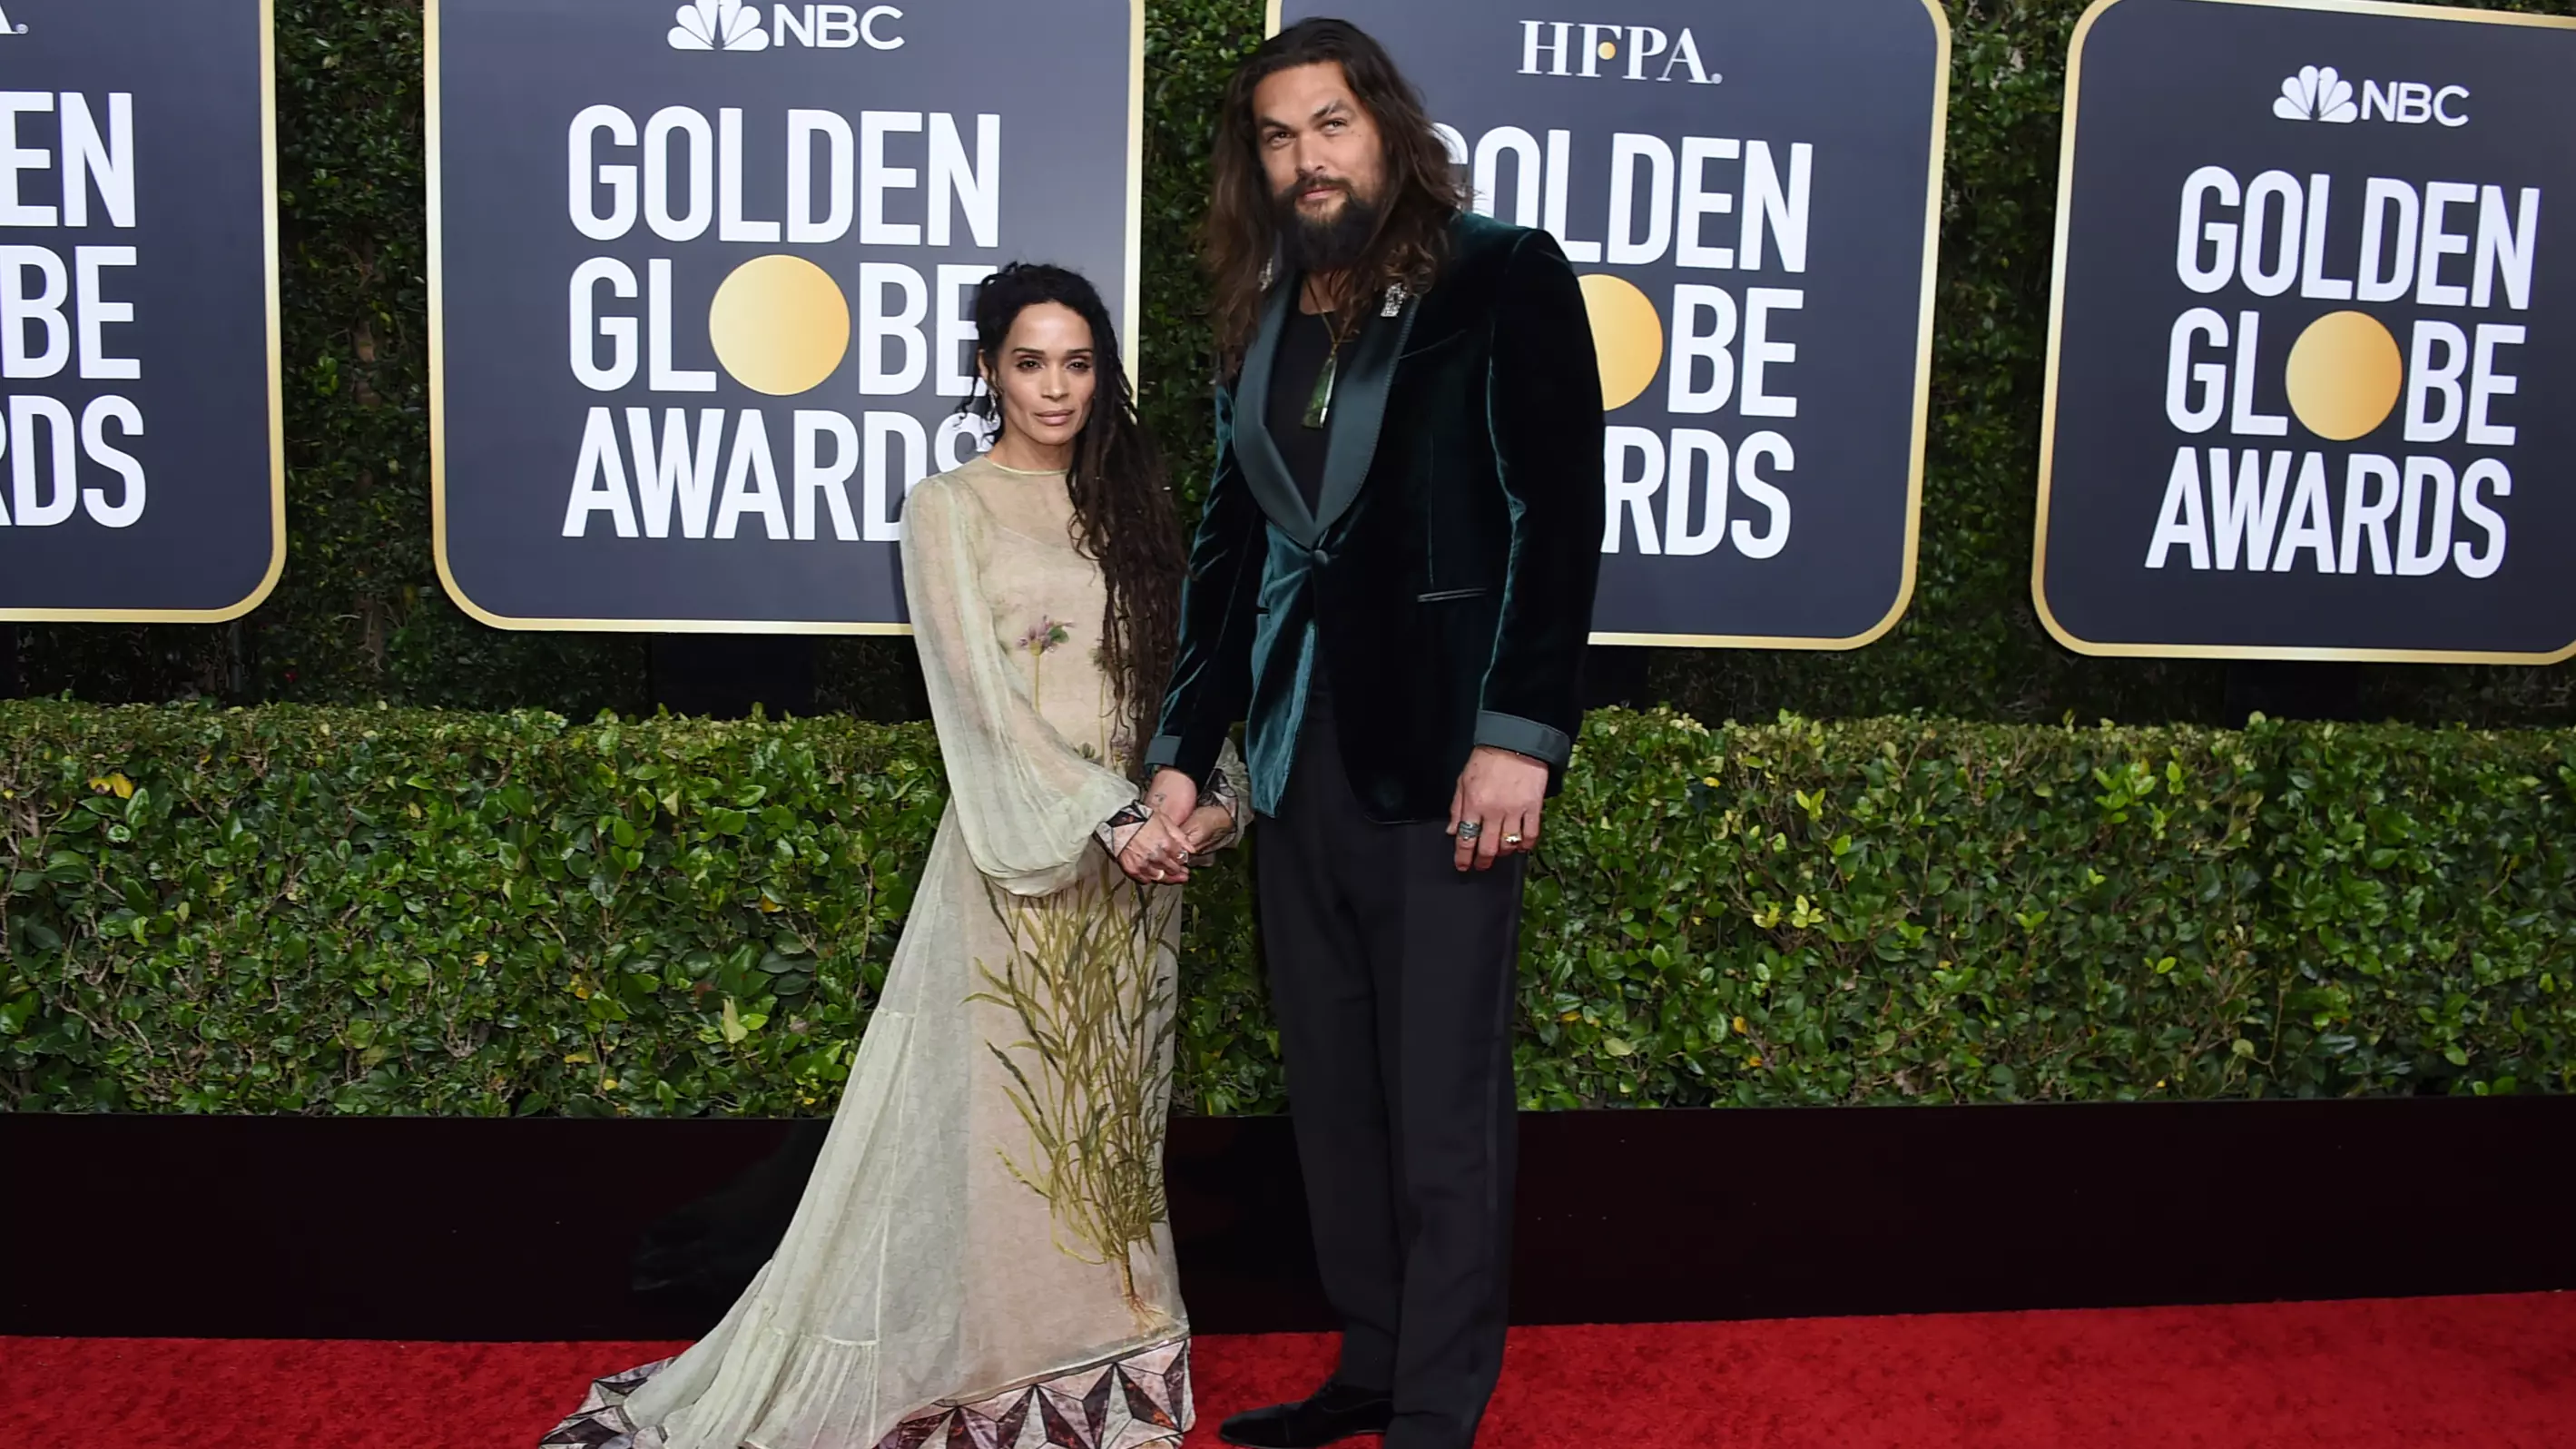 Jason Momoa Wore A Tank Top To The Golden Globes And Twitter Is Losing It